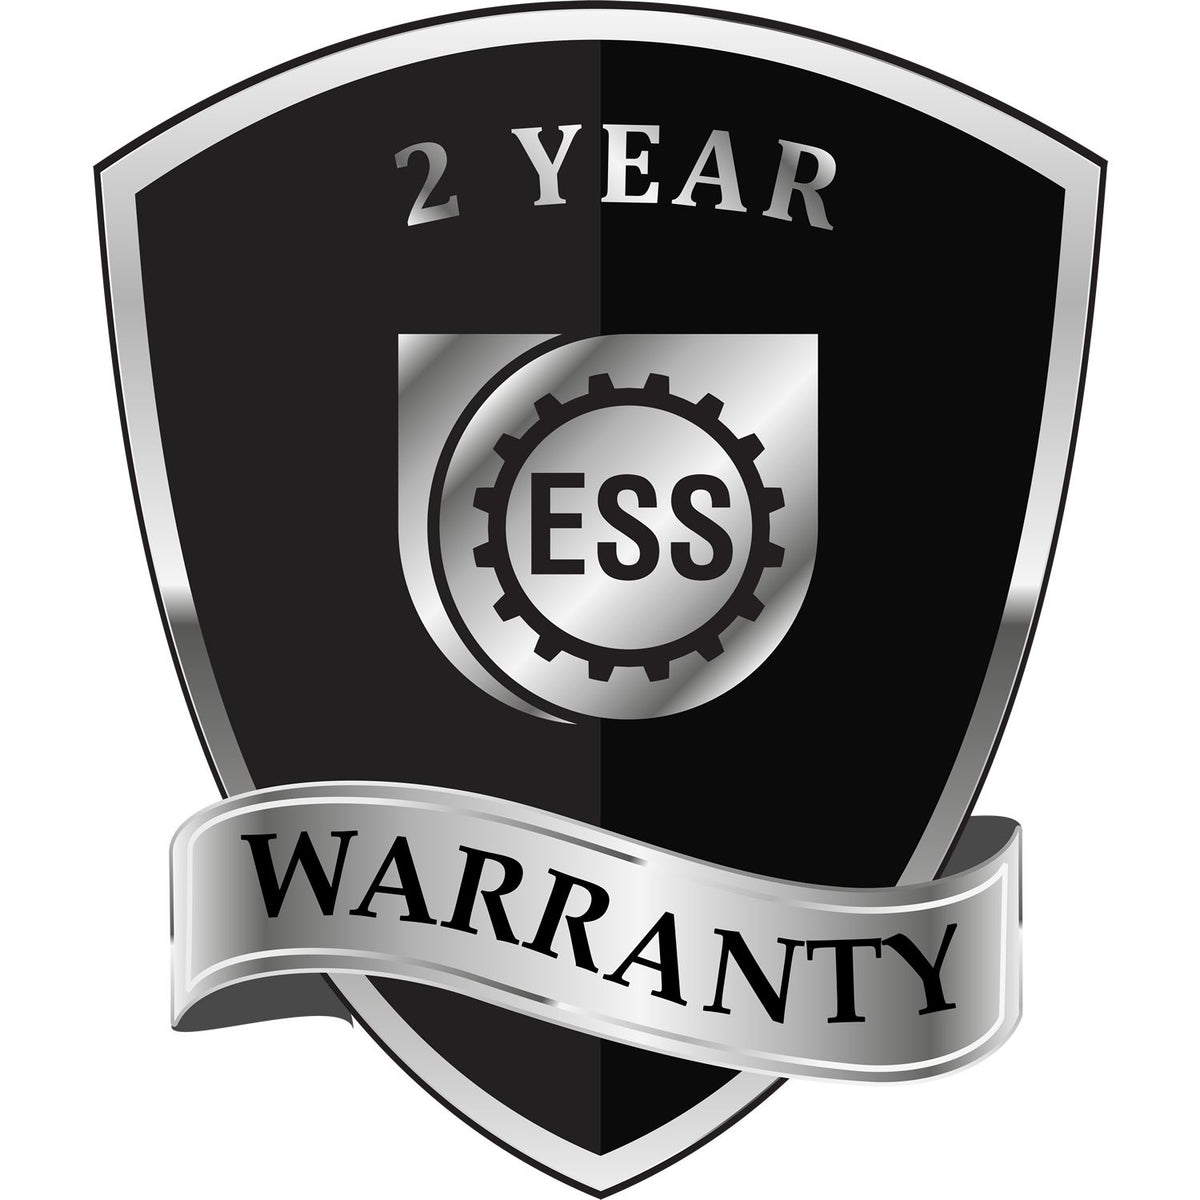 A black and silver badge or emblem showing warranty information for the Heavy Duty Cast Iron Colorado Geologist Seal Embosser